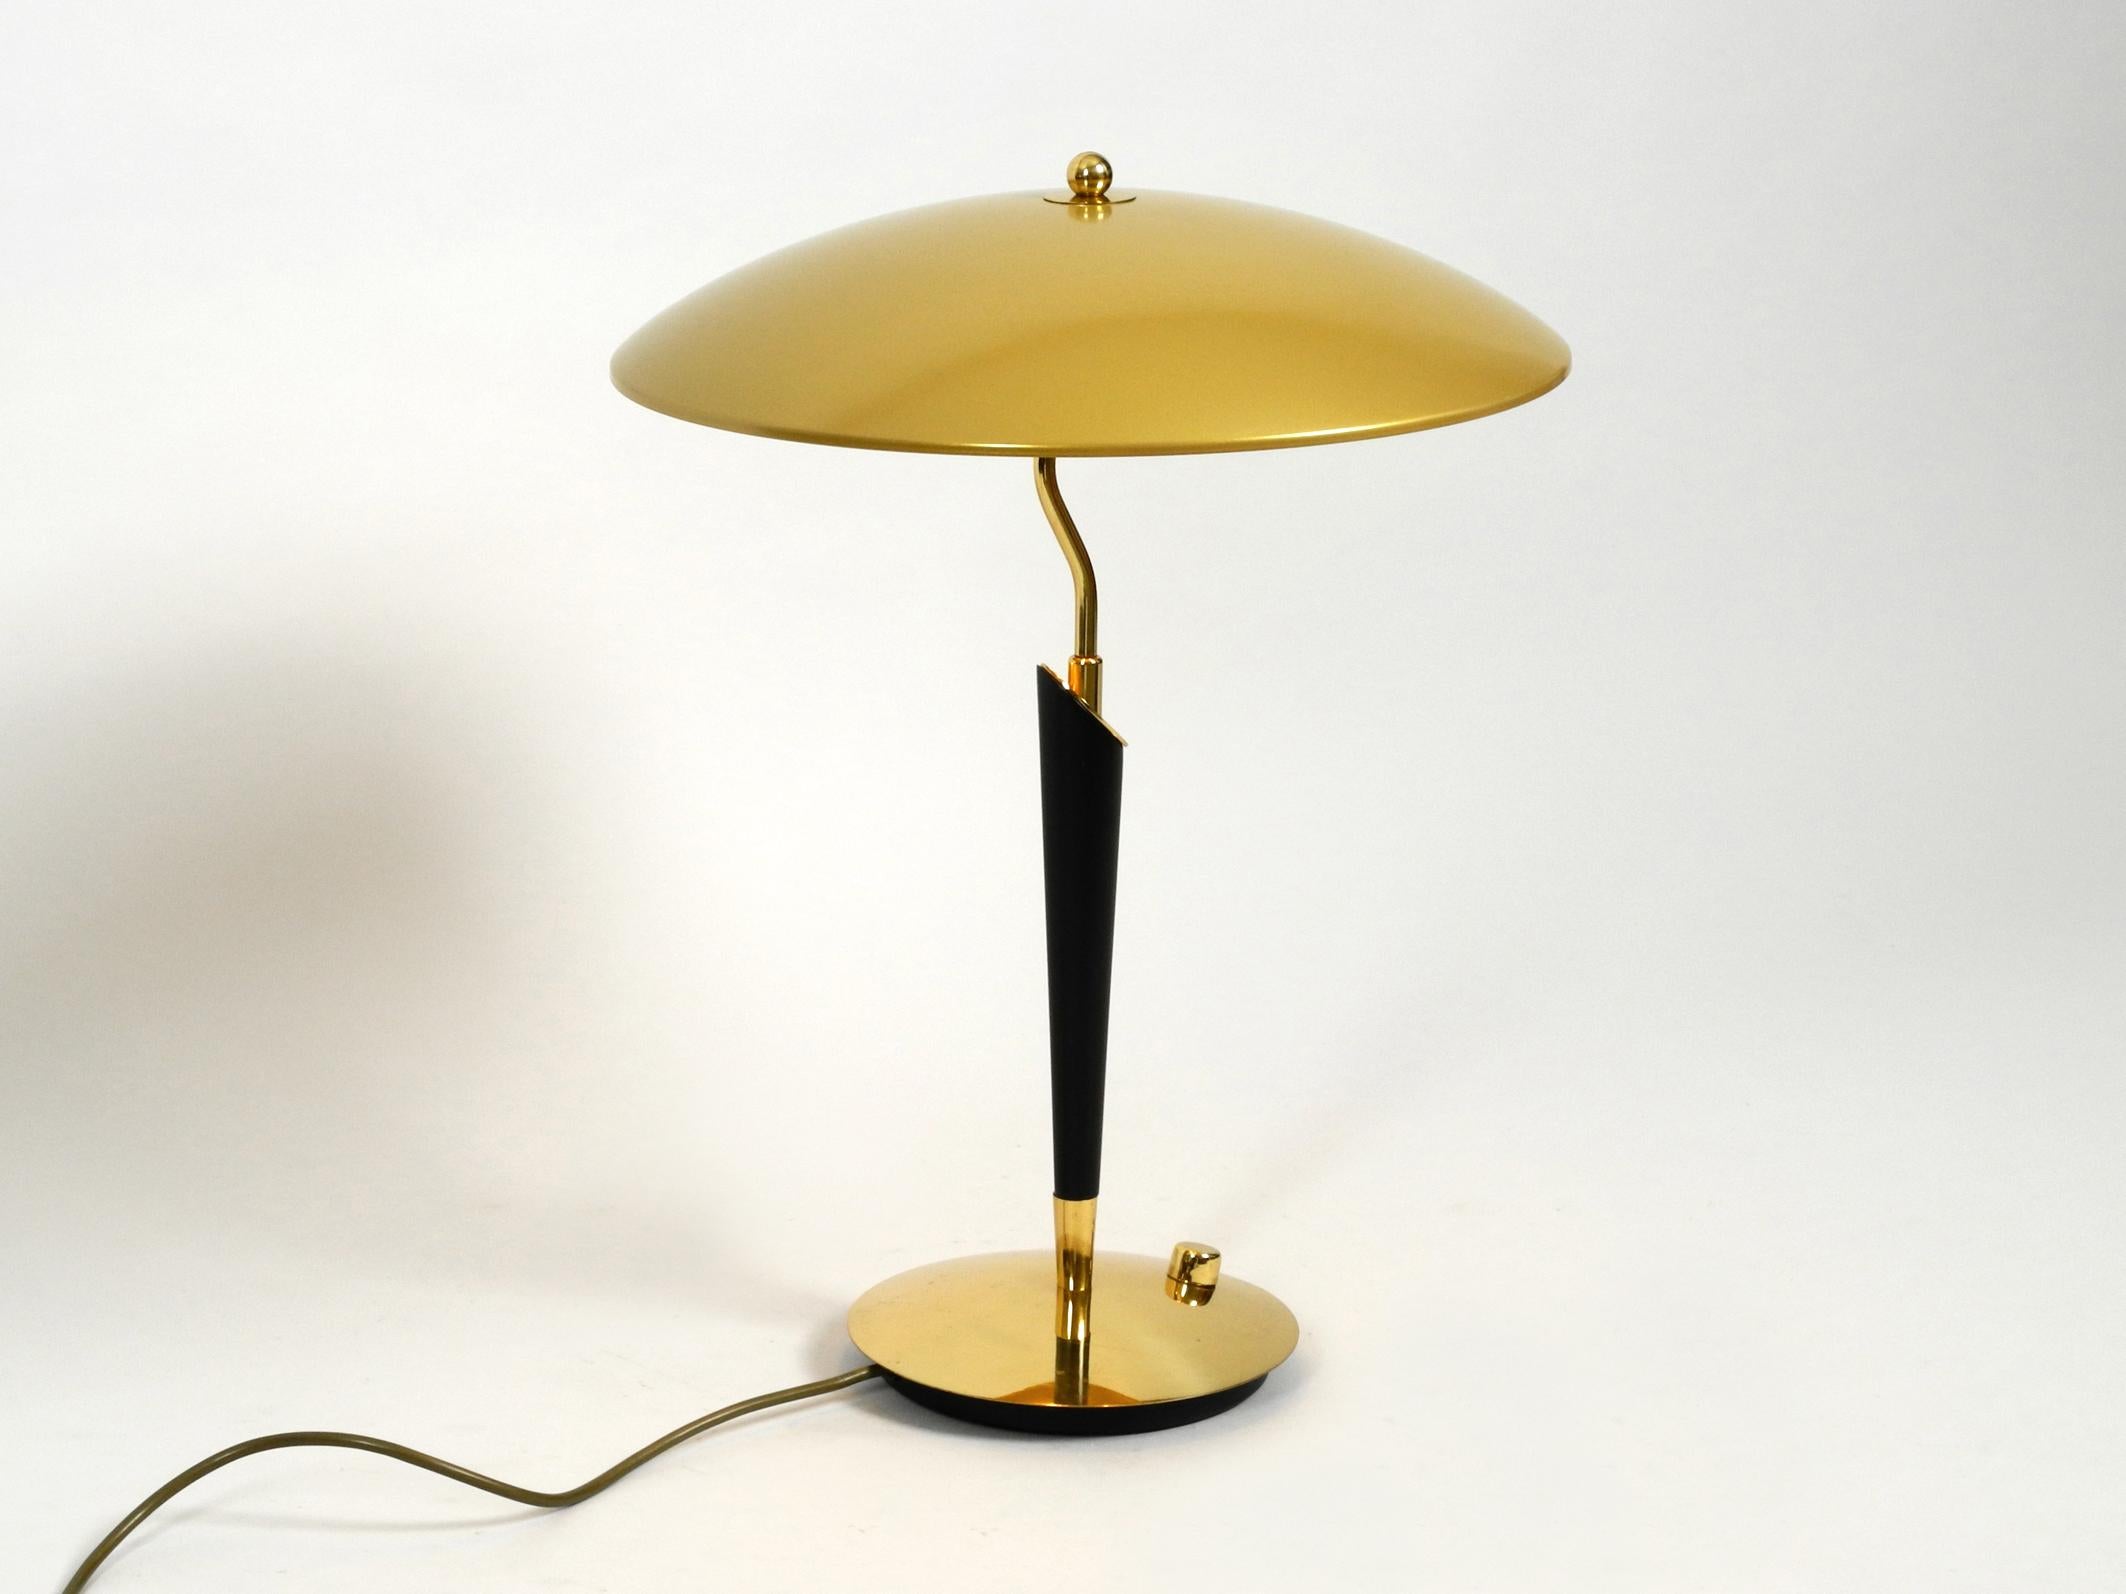 Very elegant heavy extra large brass table lamp from Hillebrand. Manufactured in the 1960s.
Very large version with a huge shade and heavy foot.
Beautiful Mid Century design made entirely of brass with three E14 sockets for 40W each.
The switch